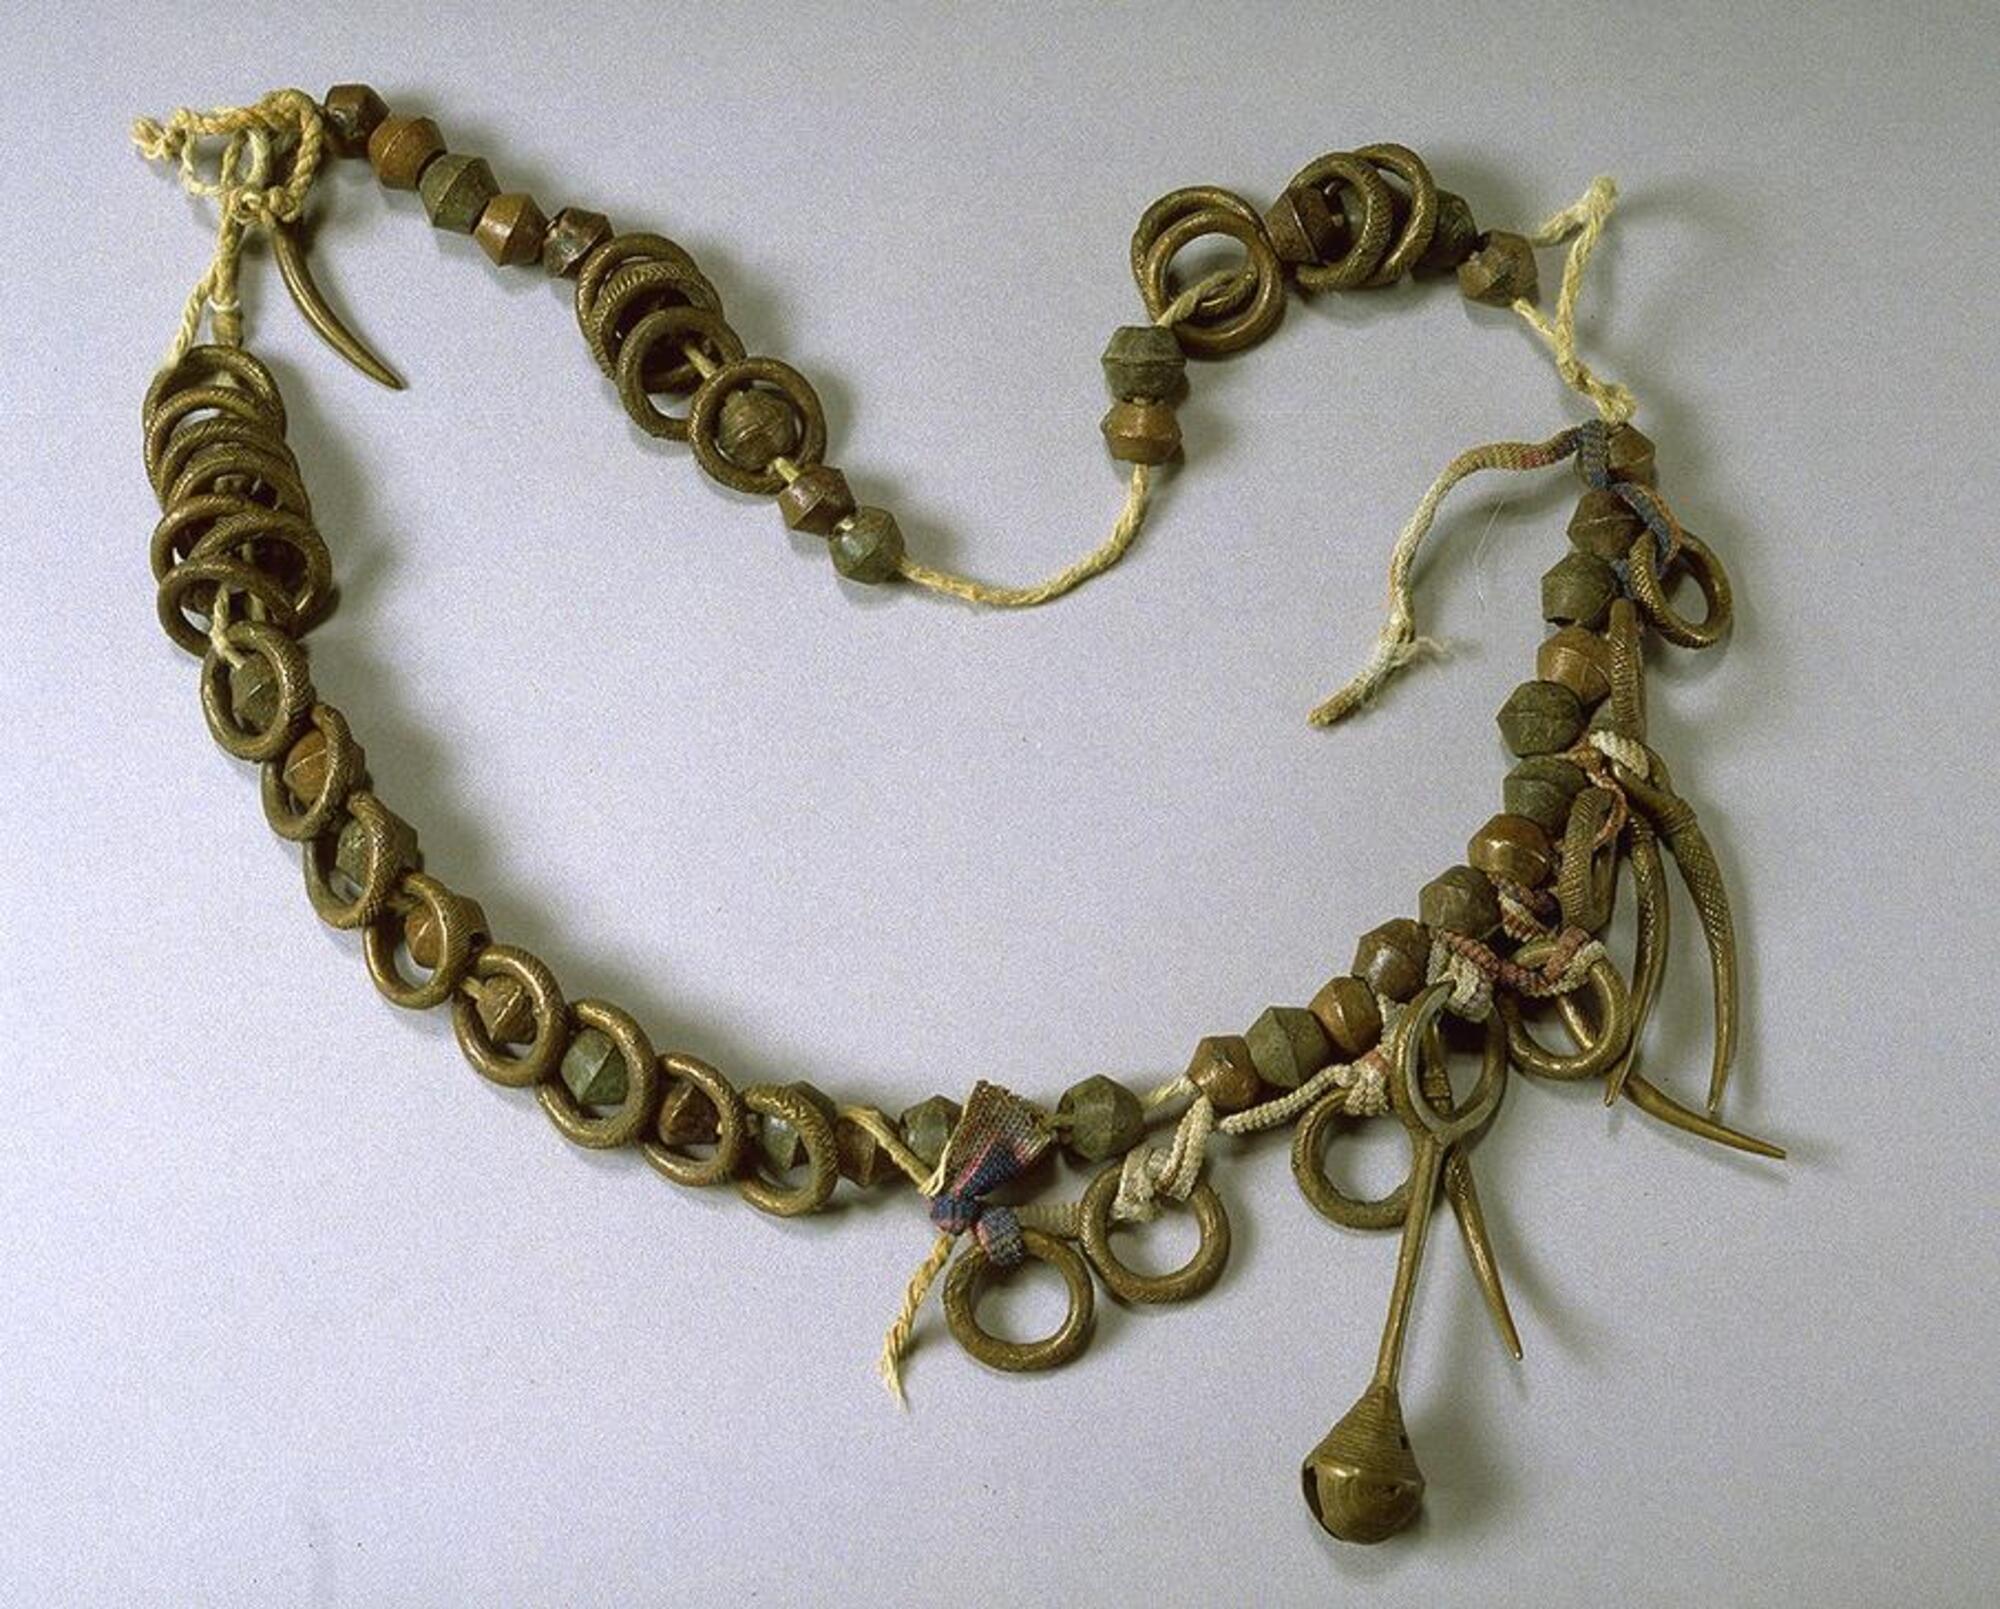 Belt with large, bicone brass beads and large brass rings threaded on a thick string. Some of the brass rings have incised grooves. There is one crotal bell pendant and five curved pendants. 